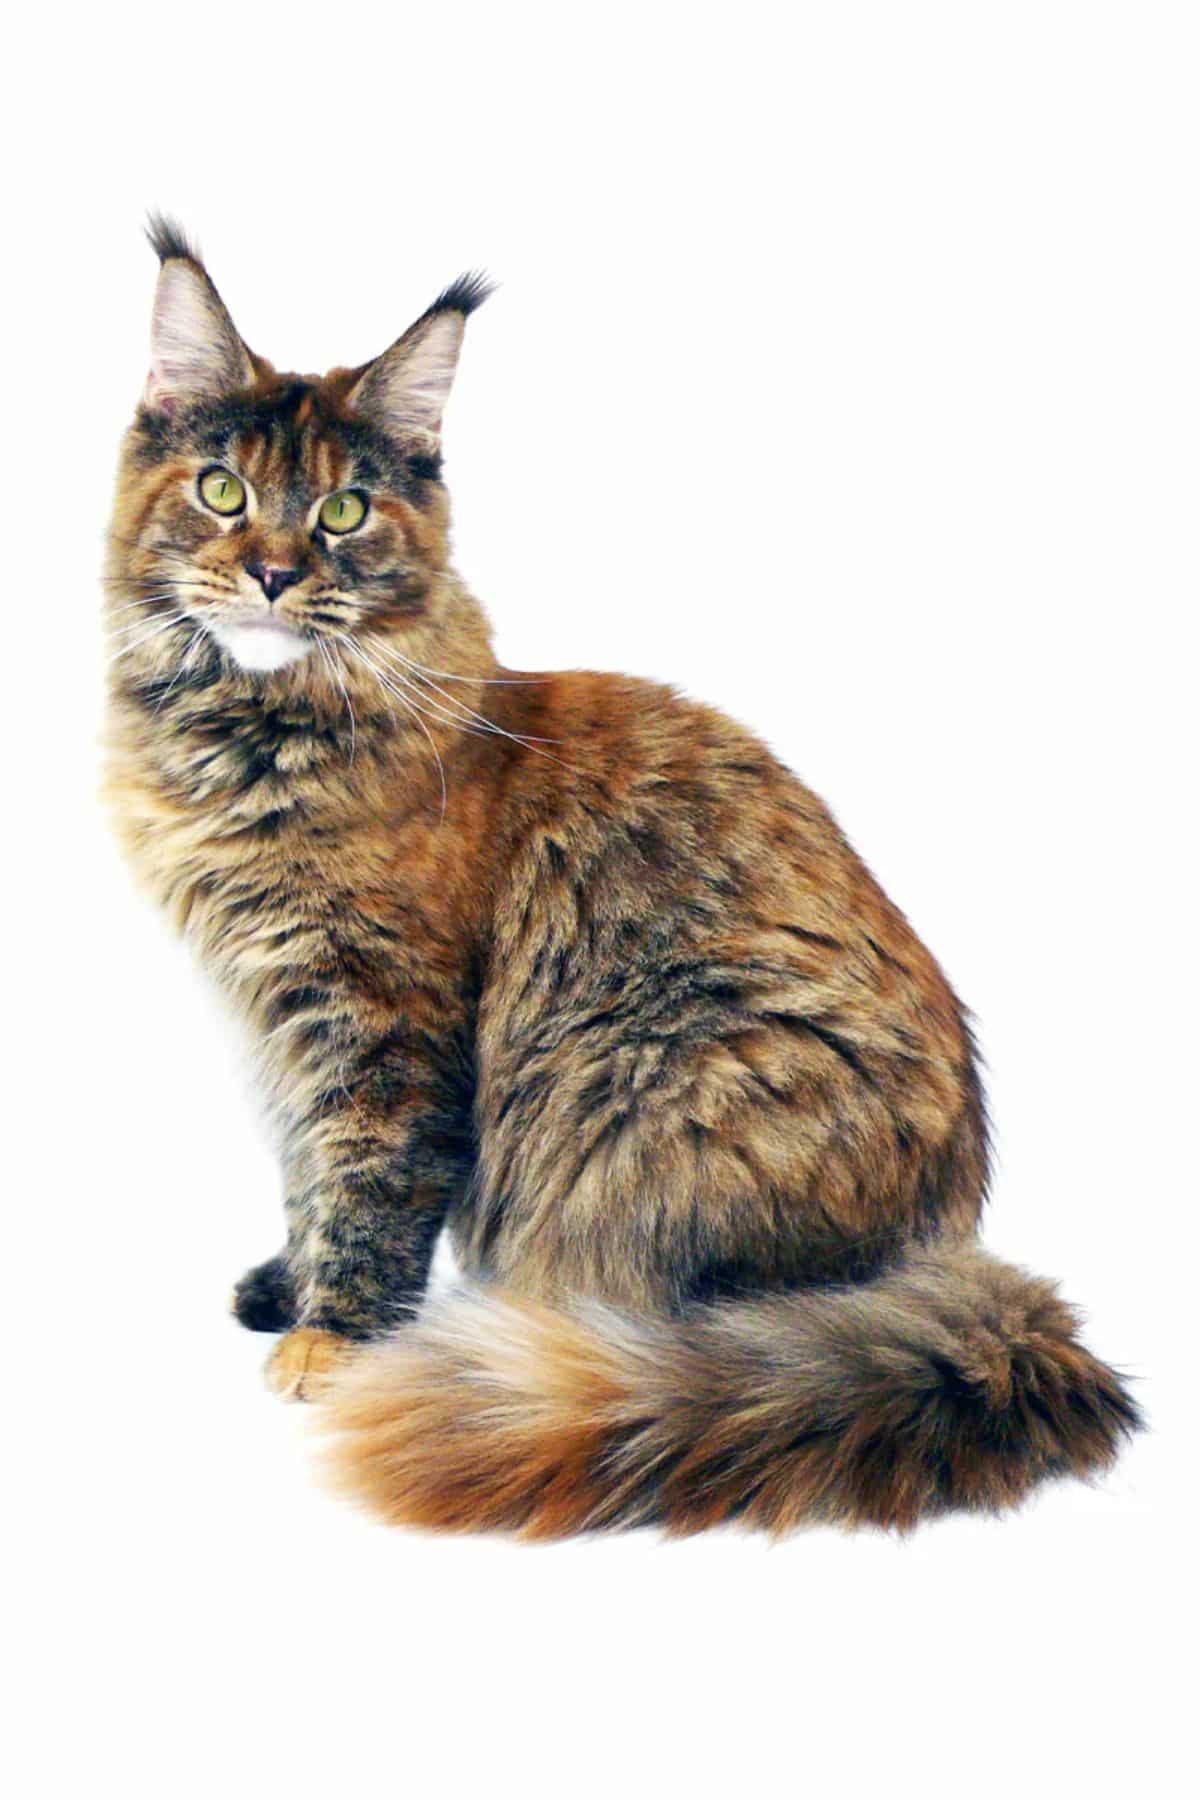 A fluffy brown maine coon on a white background.